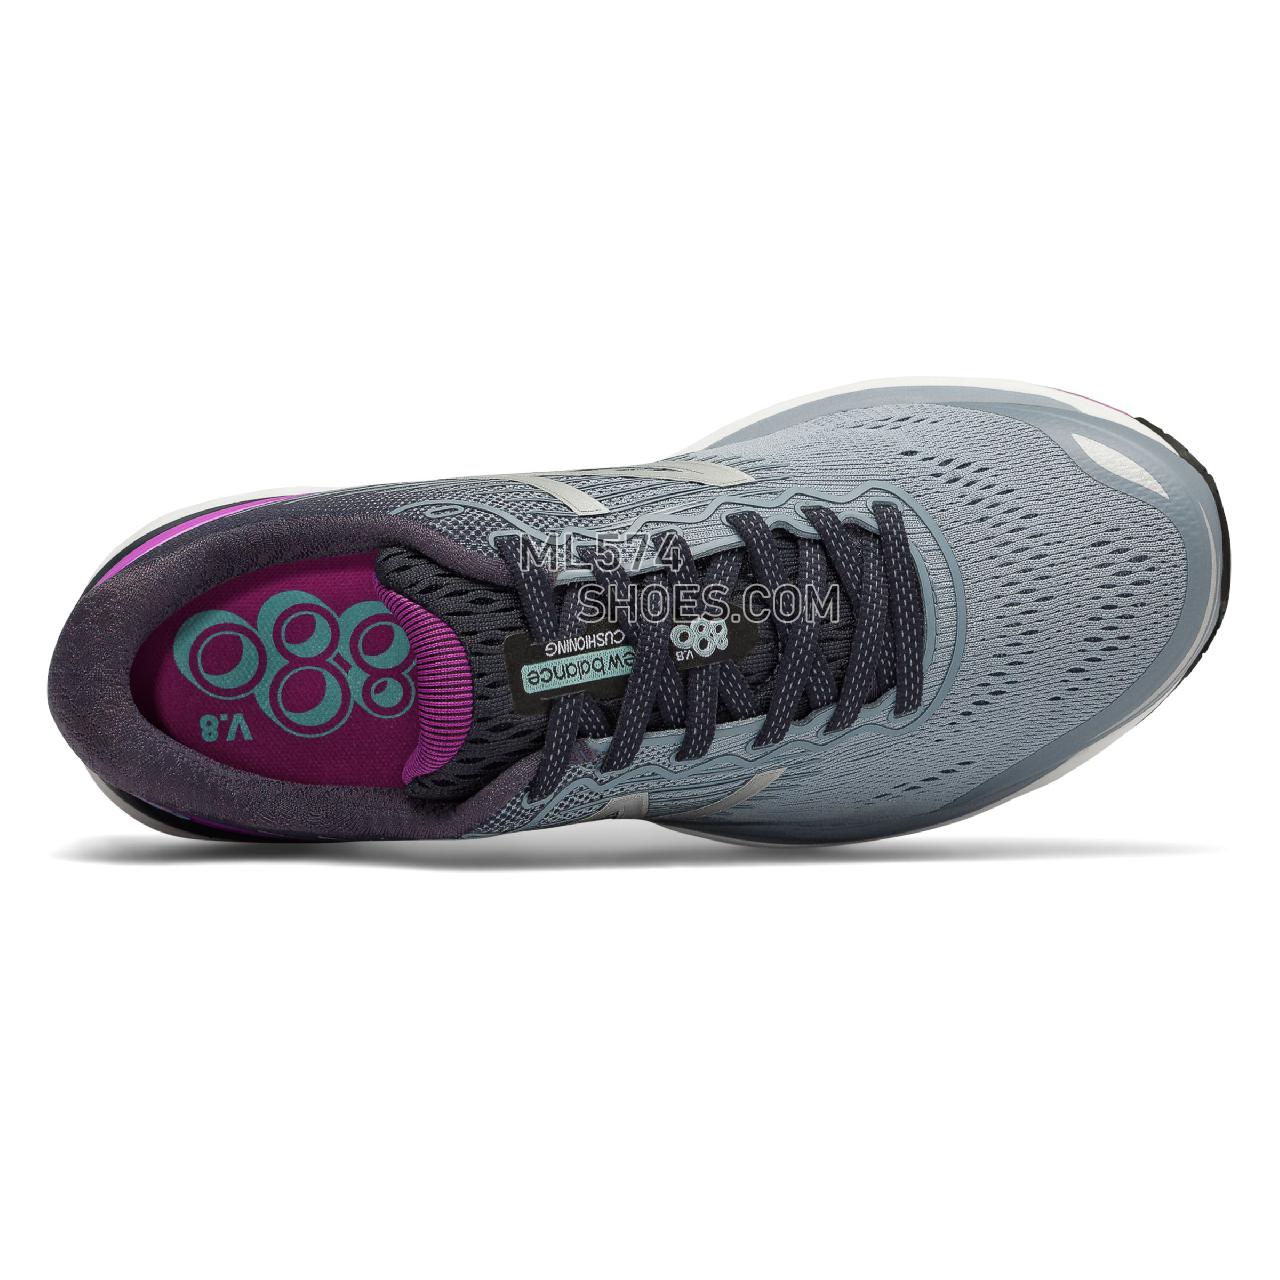 New Balance 880v8 - Women's 880 - Running Reflection with Voltage Violet - W880SD8